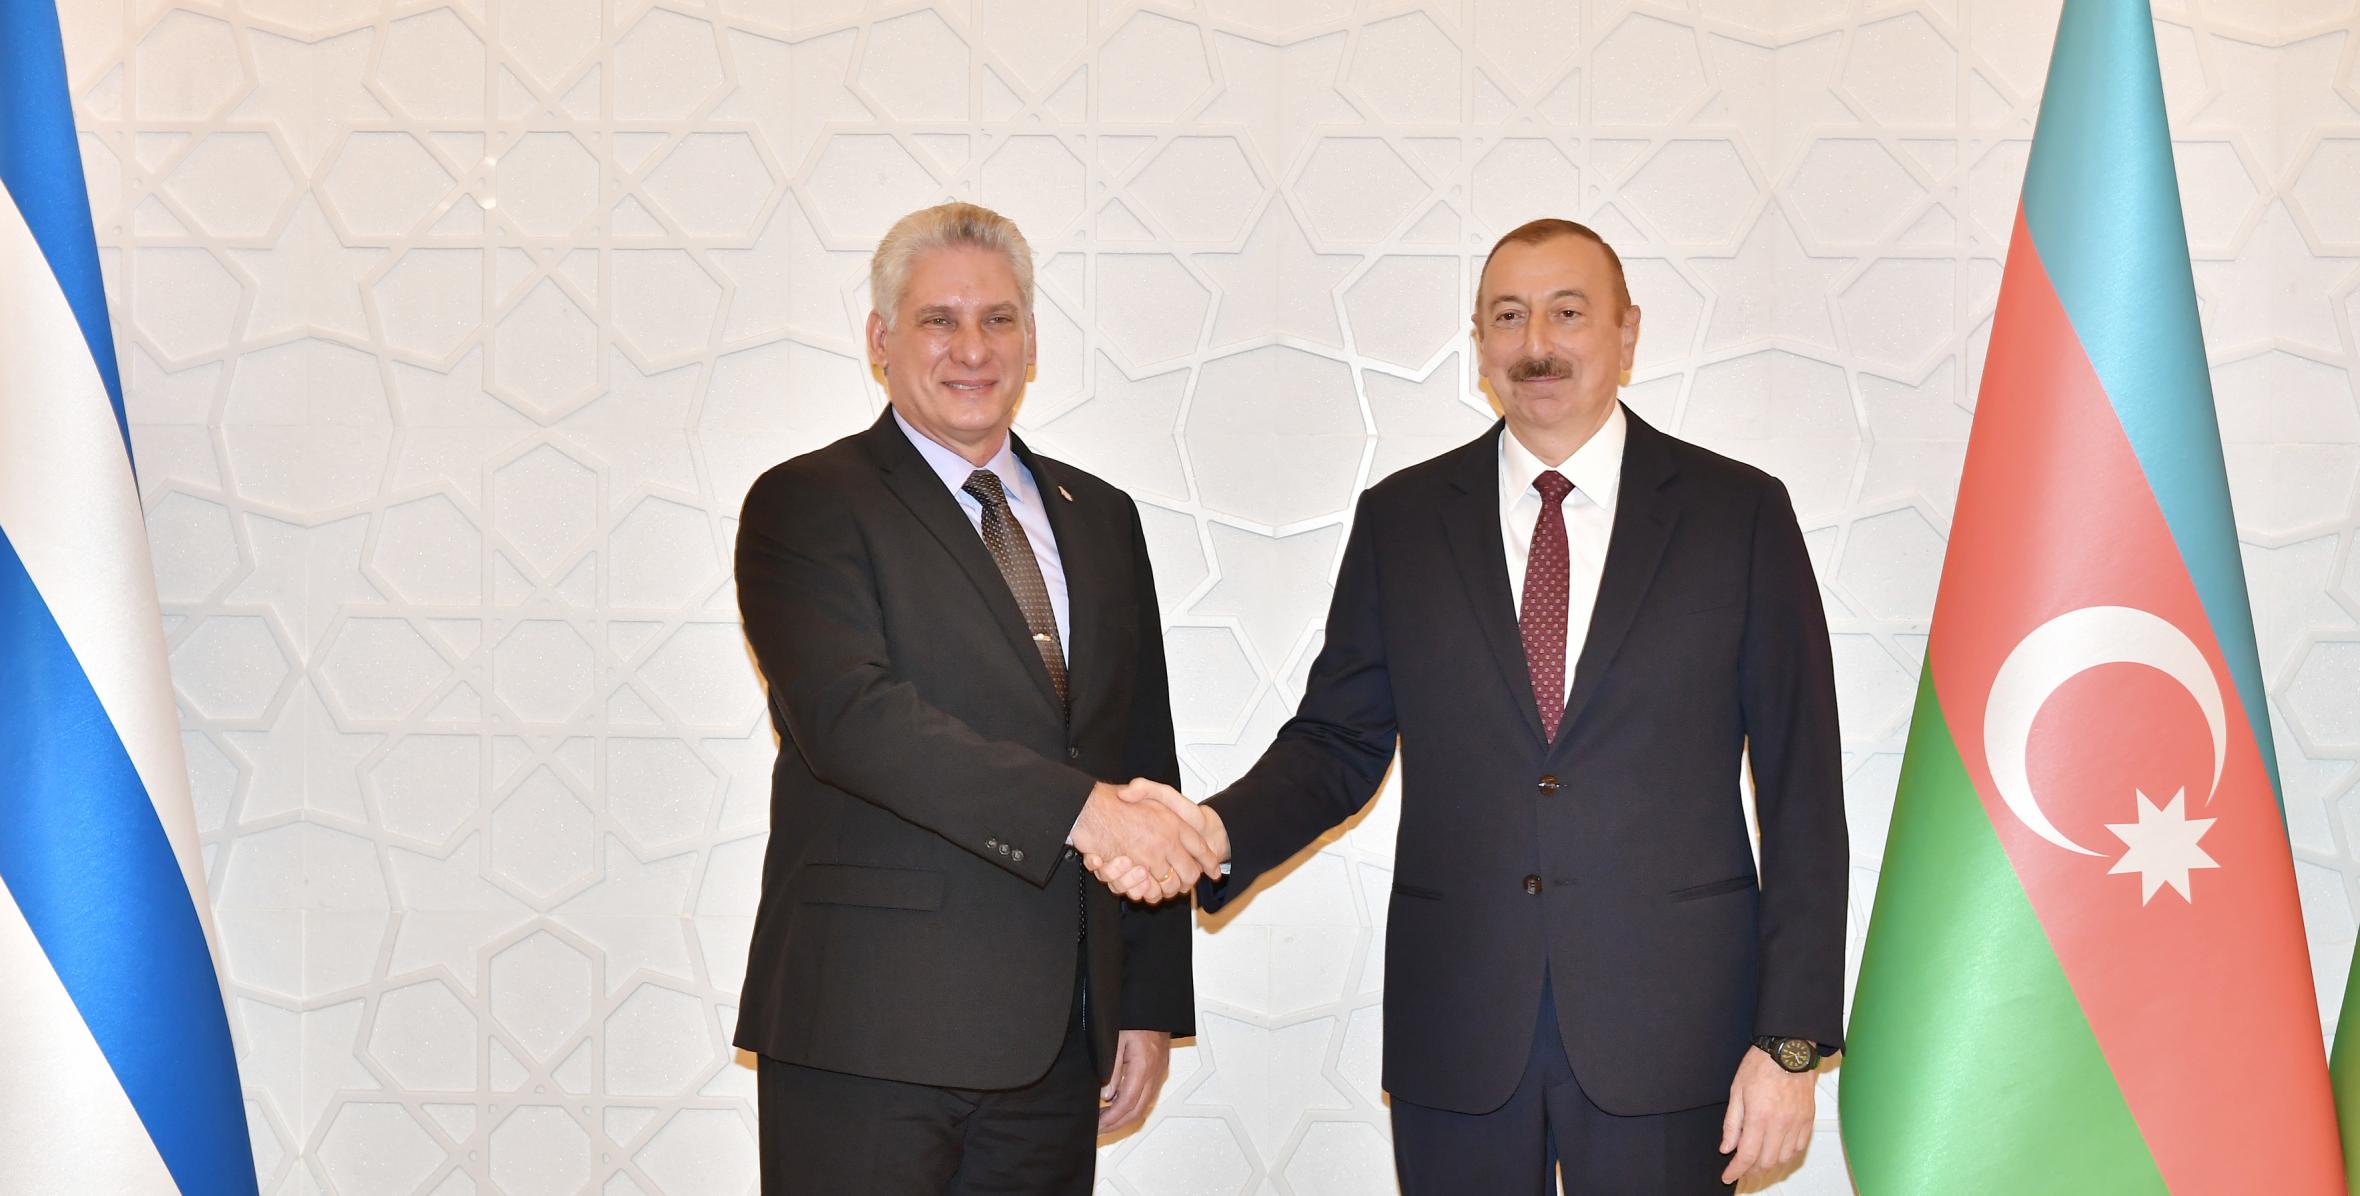 Ilham Aliyev met with President of Cuba Miguel Diaz-Canel